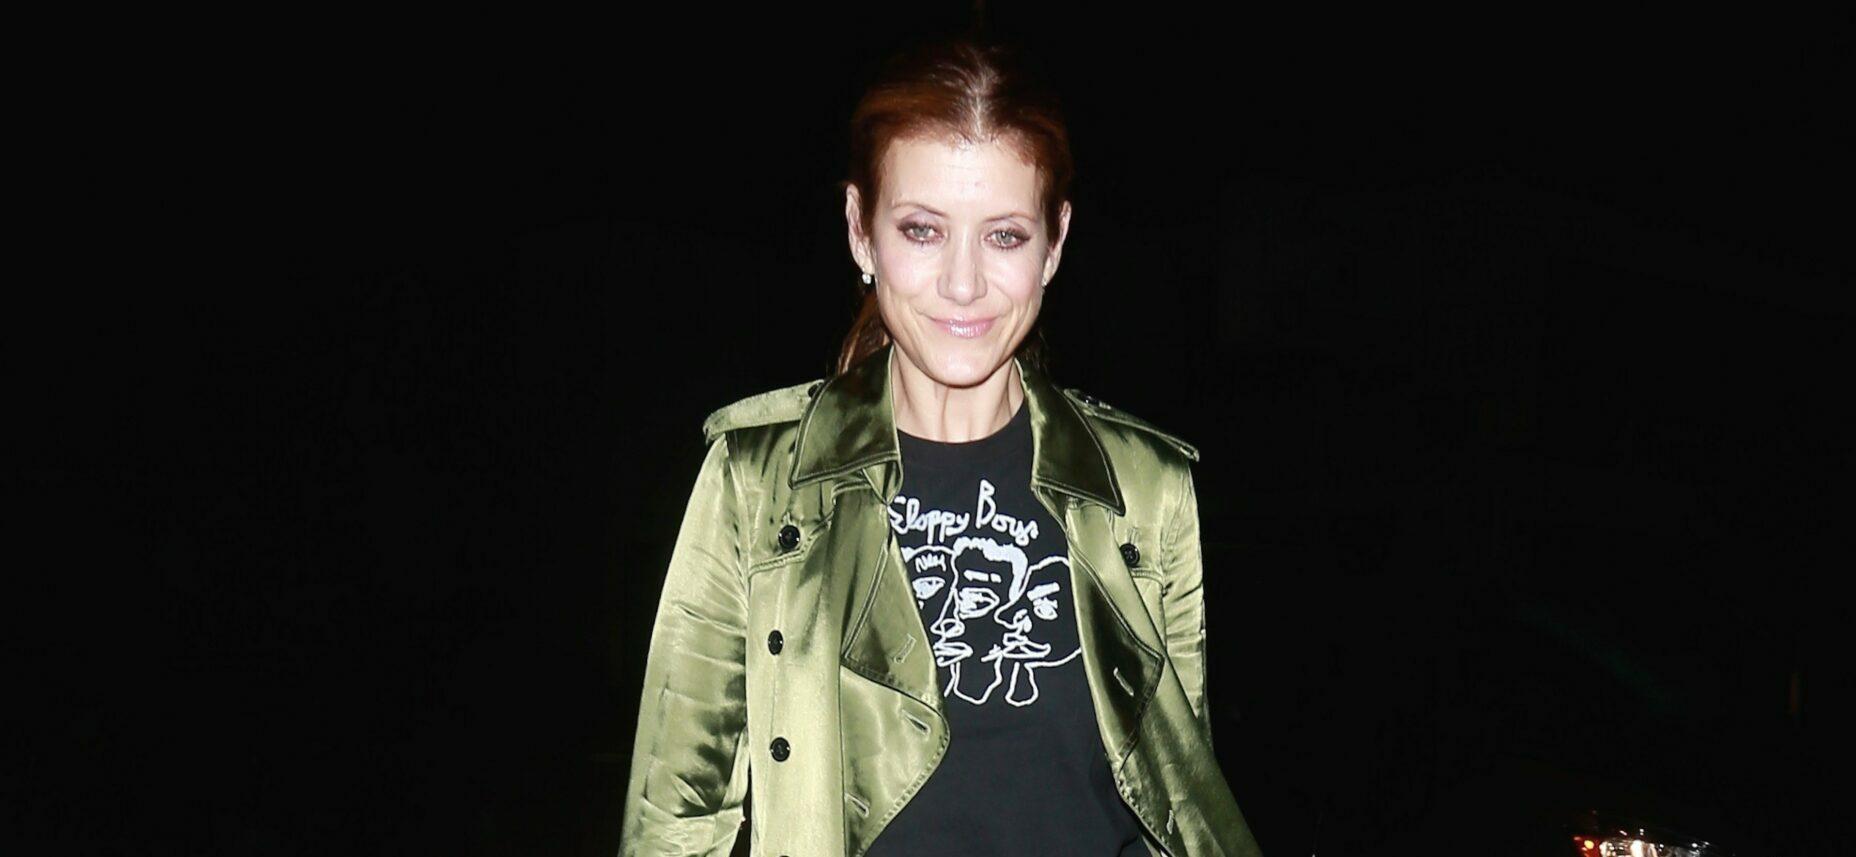 Actress Kate Walsh is seen looking fashionable as she arrives to Craig's restaurant in Los Angeles.